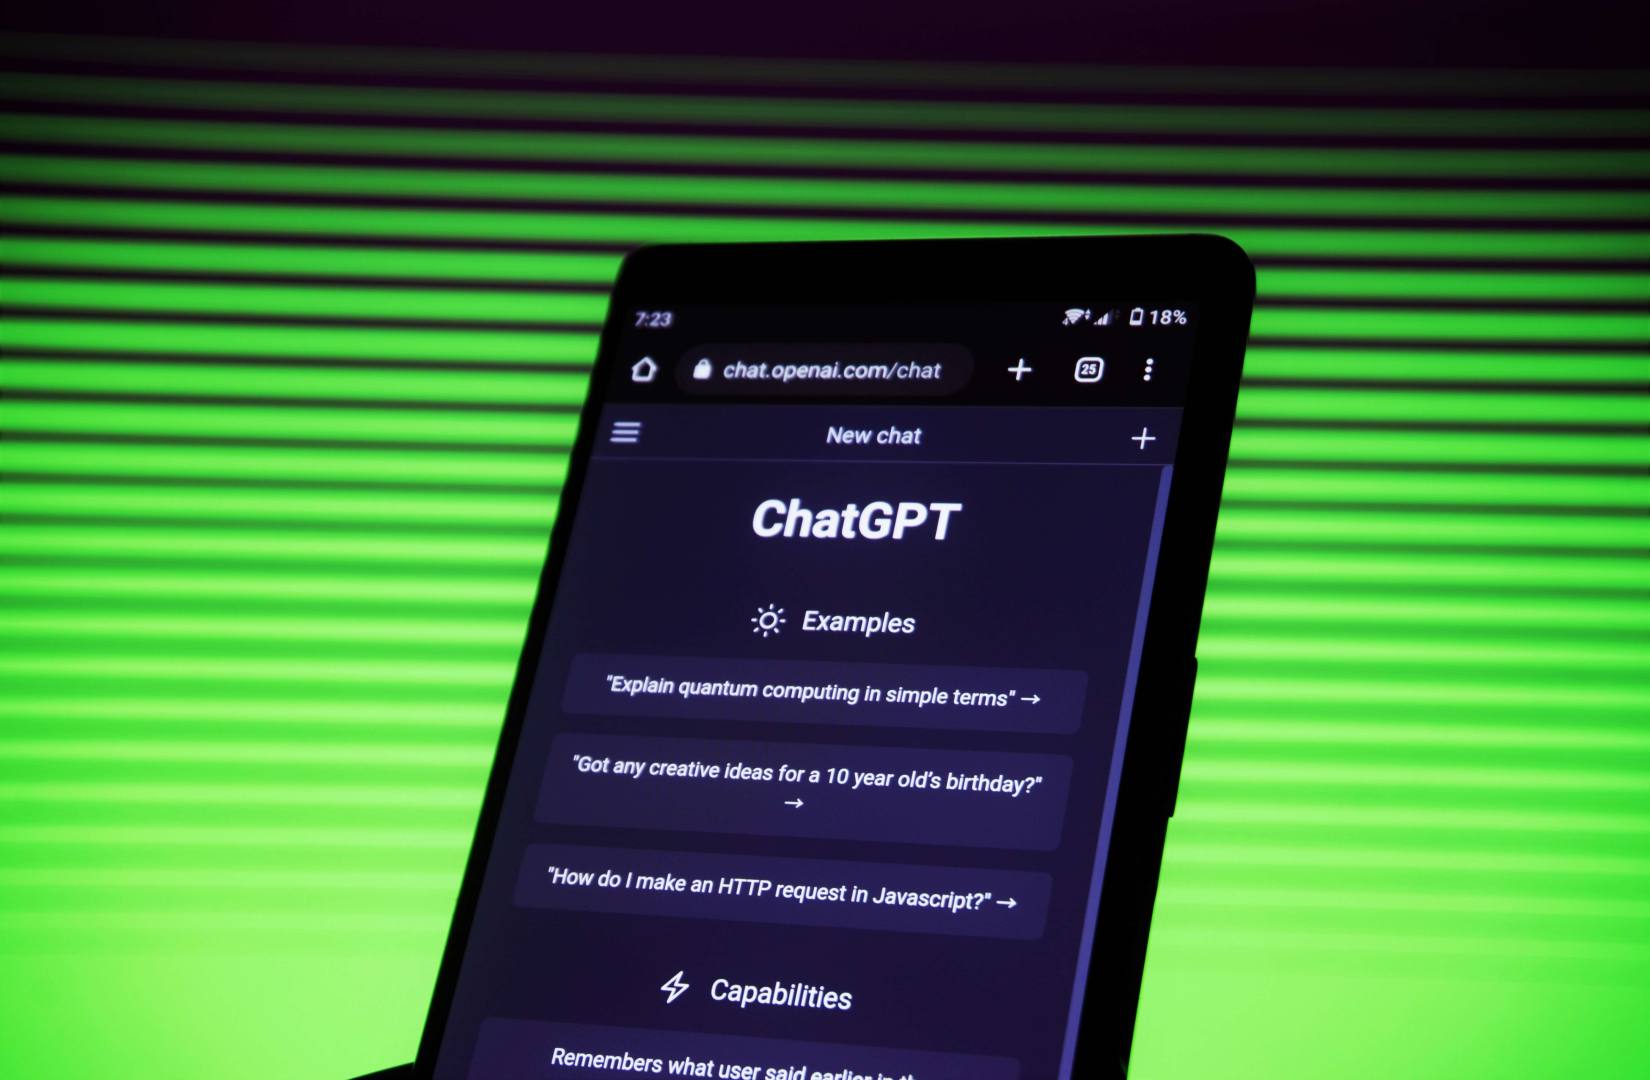 ChatGPT prompts on mobile phone